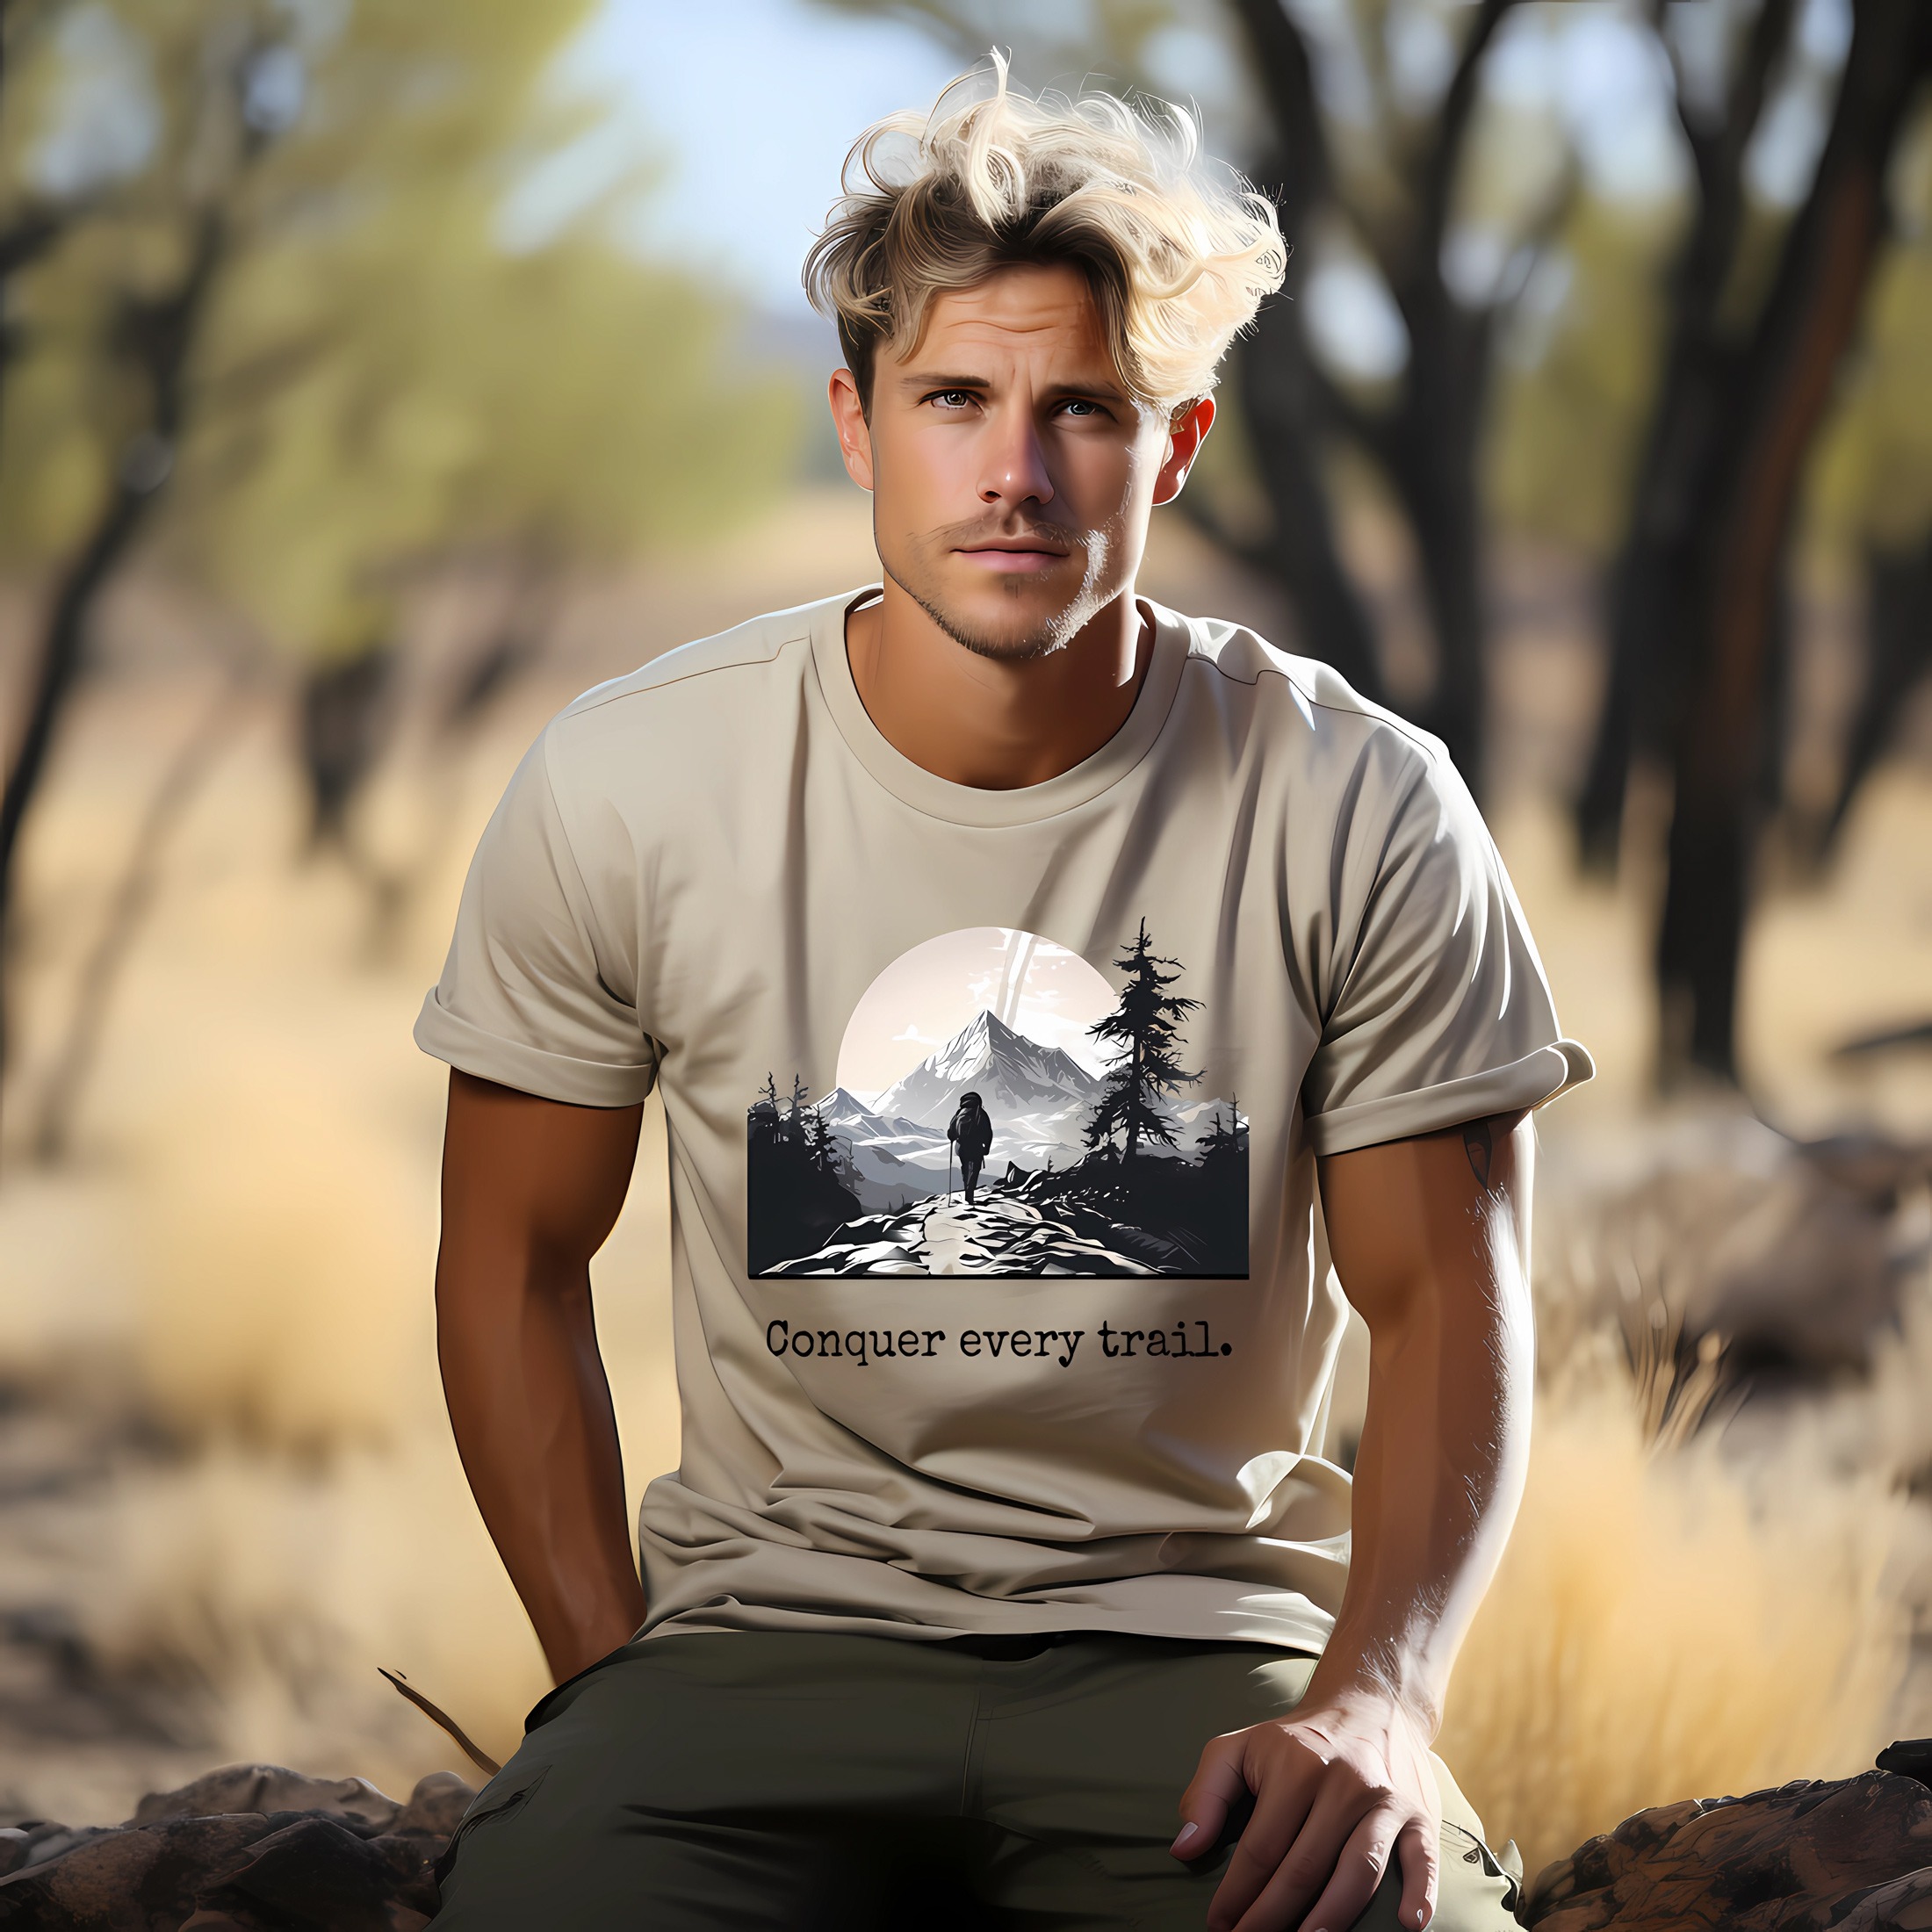 Conquer every trail. | Hiking Themed Shirts | Unisex t-shirt